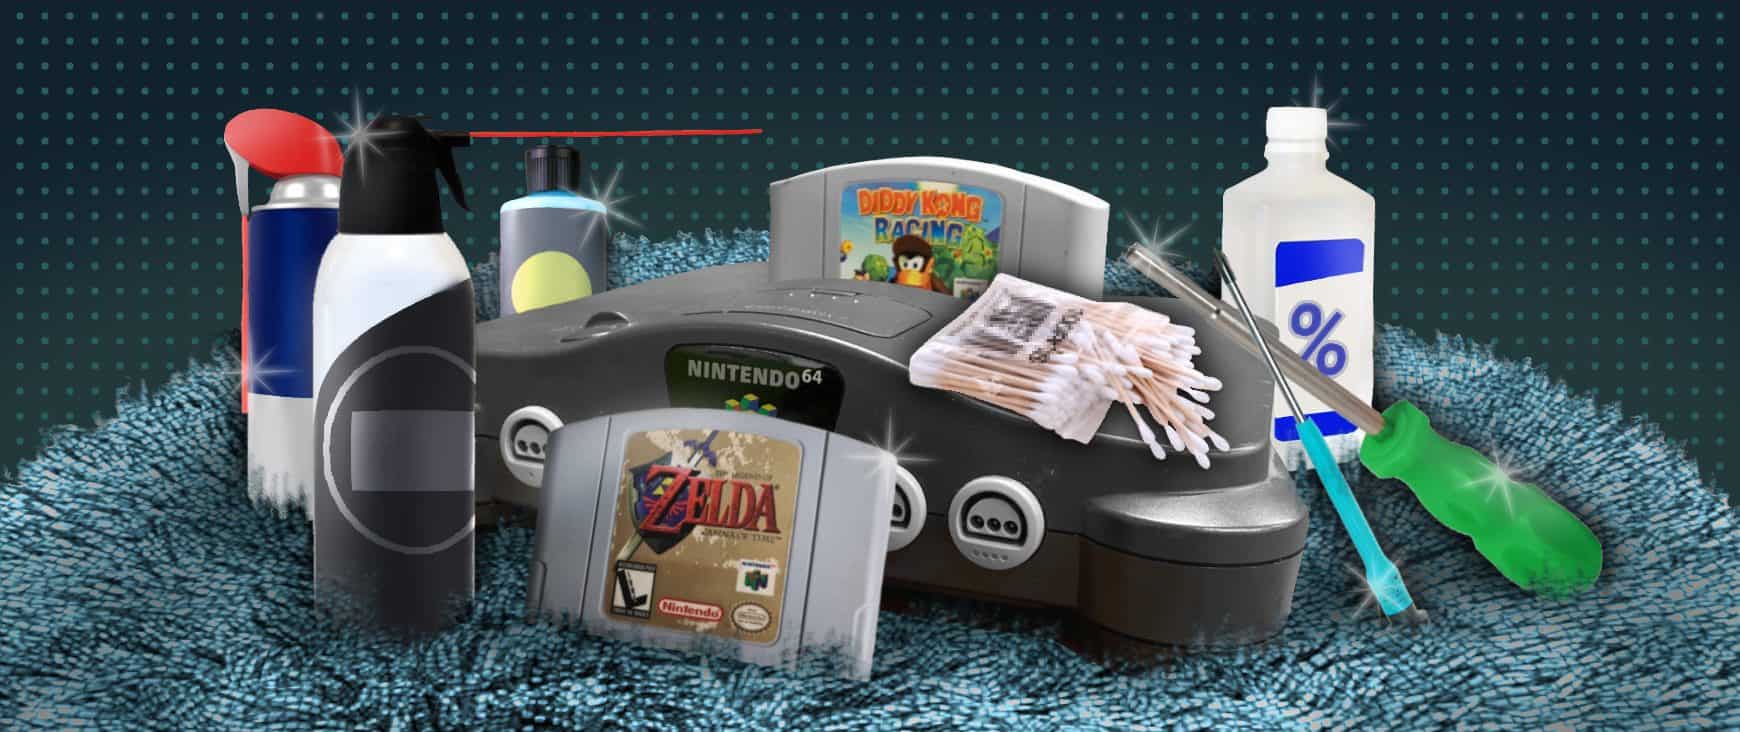 All the gear you need to clean your n64 games